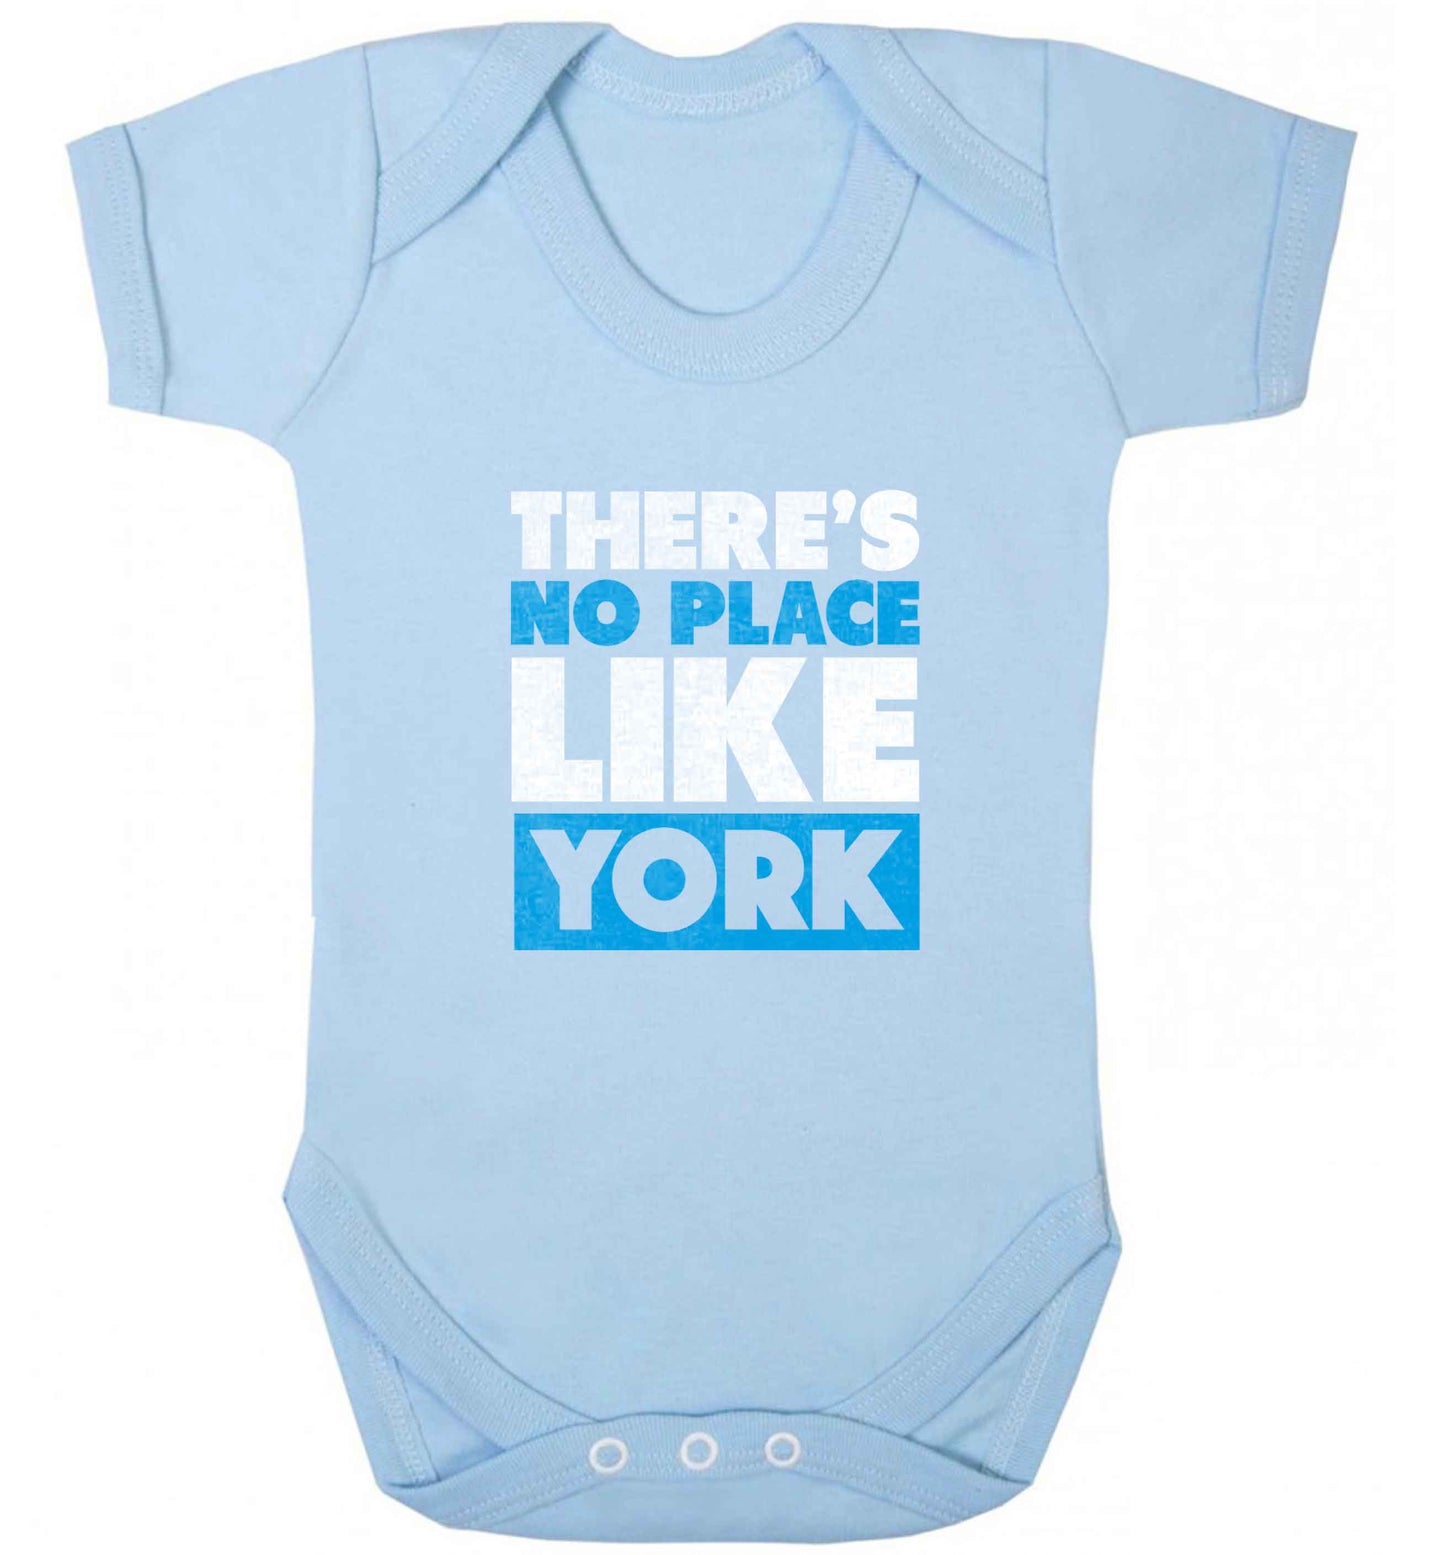 There's no place like york baby vest pale blue 18-24 months